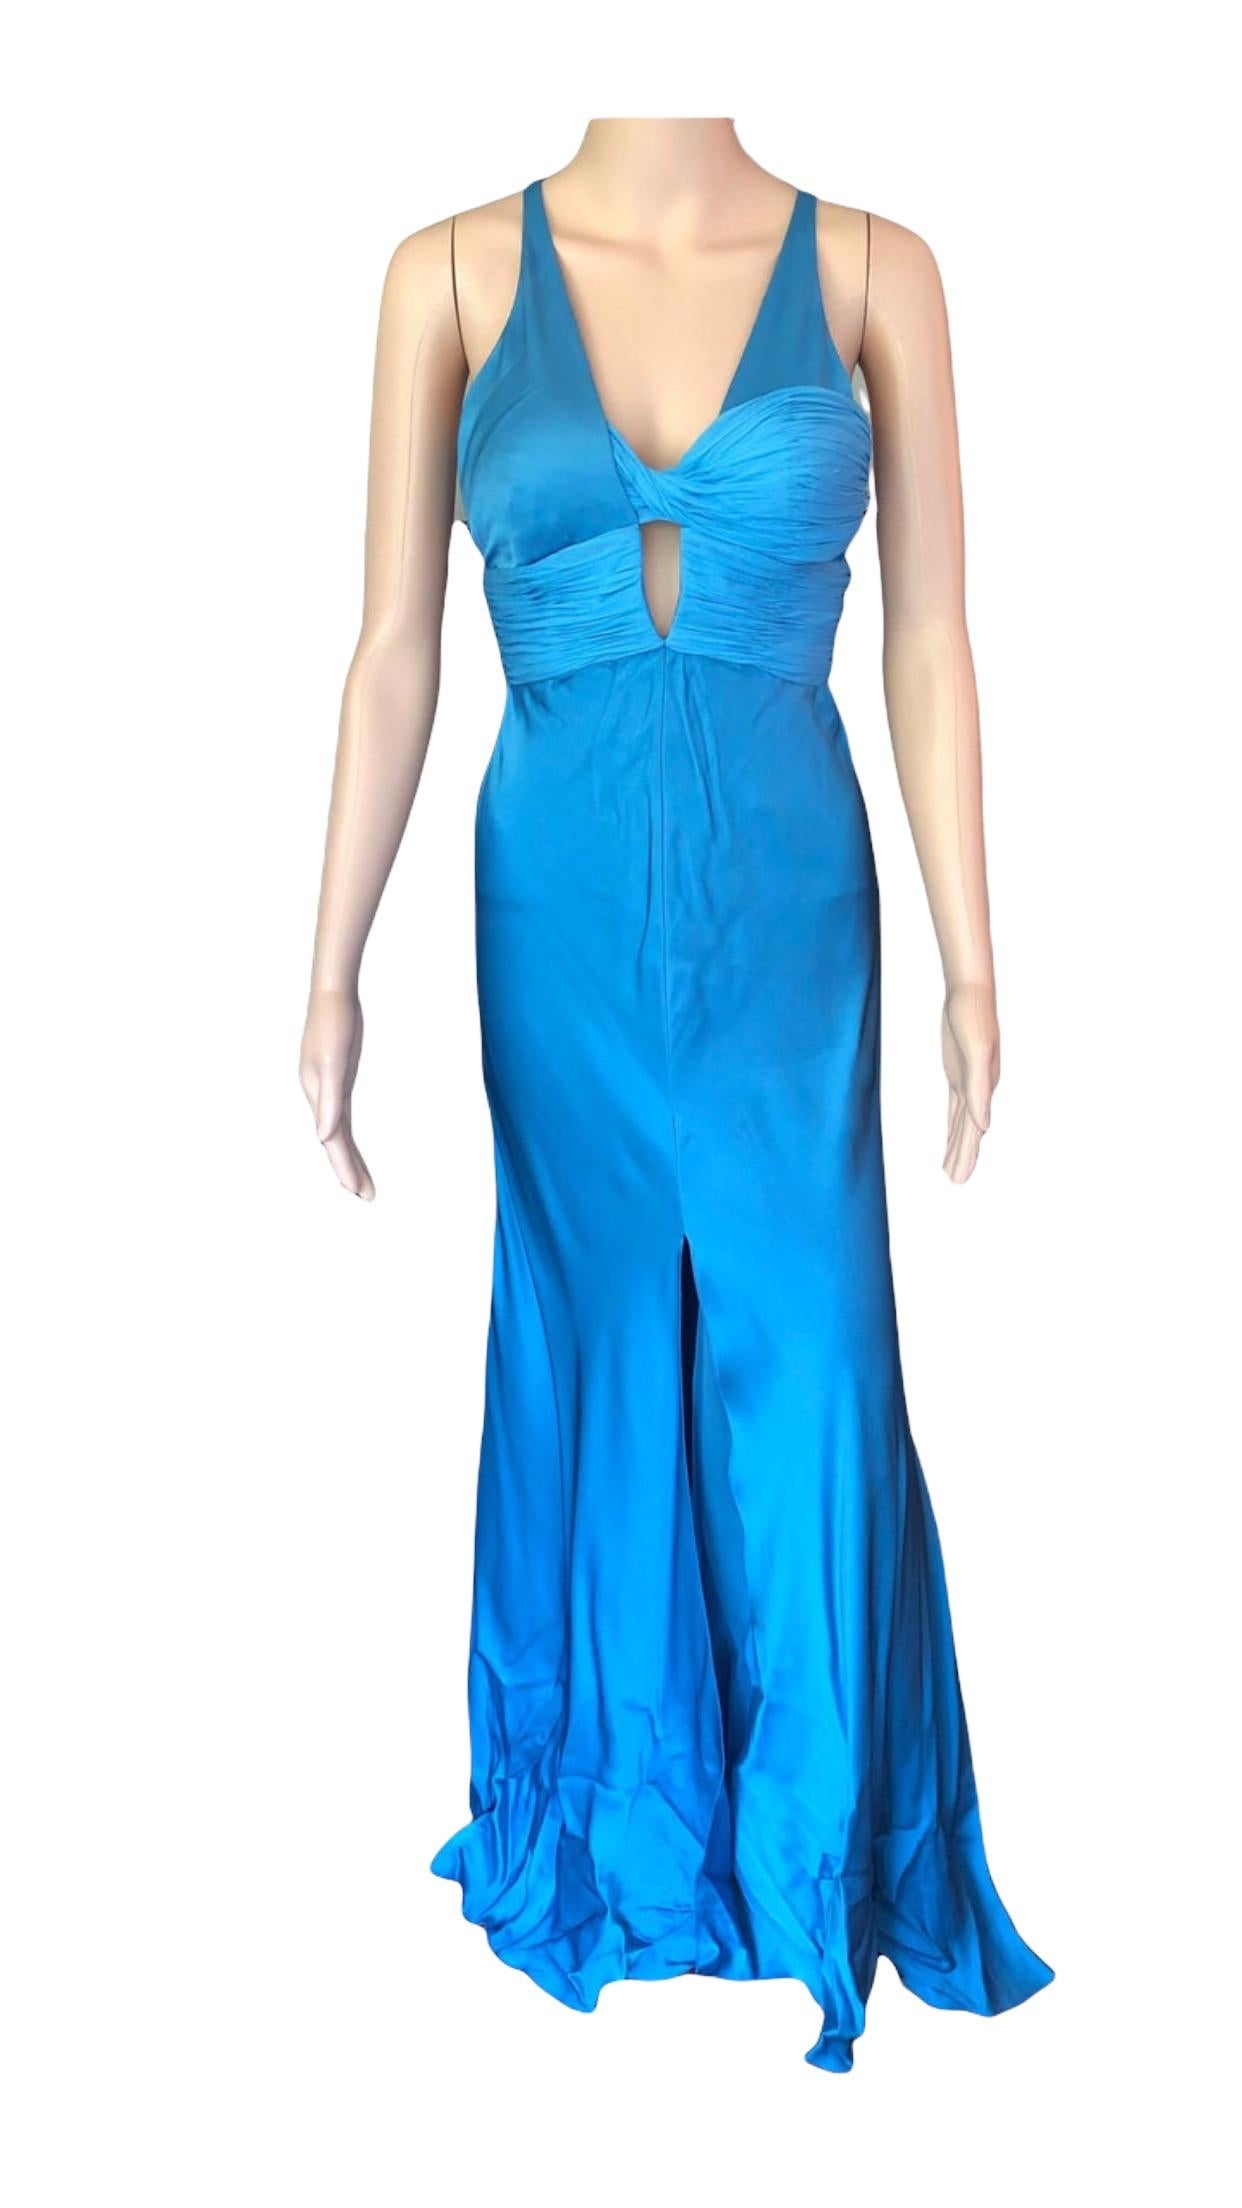 Versace S/S 2004 Bustier Open Back High Slit Blue Dress Gown For Sale 1